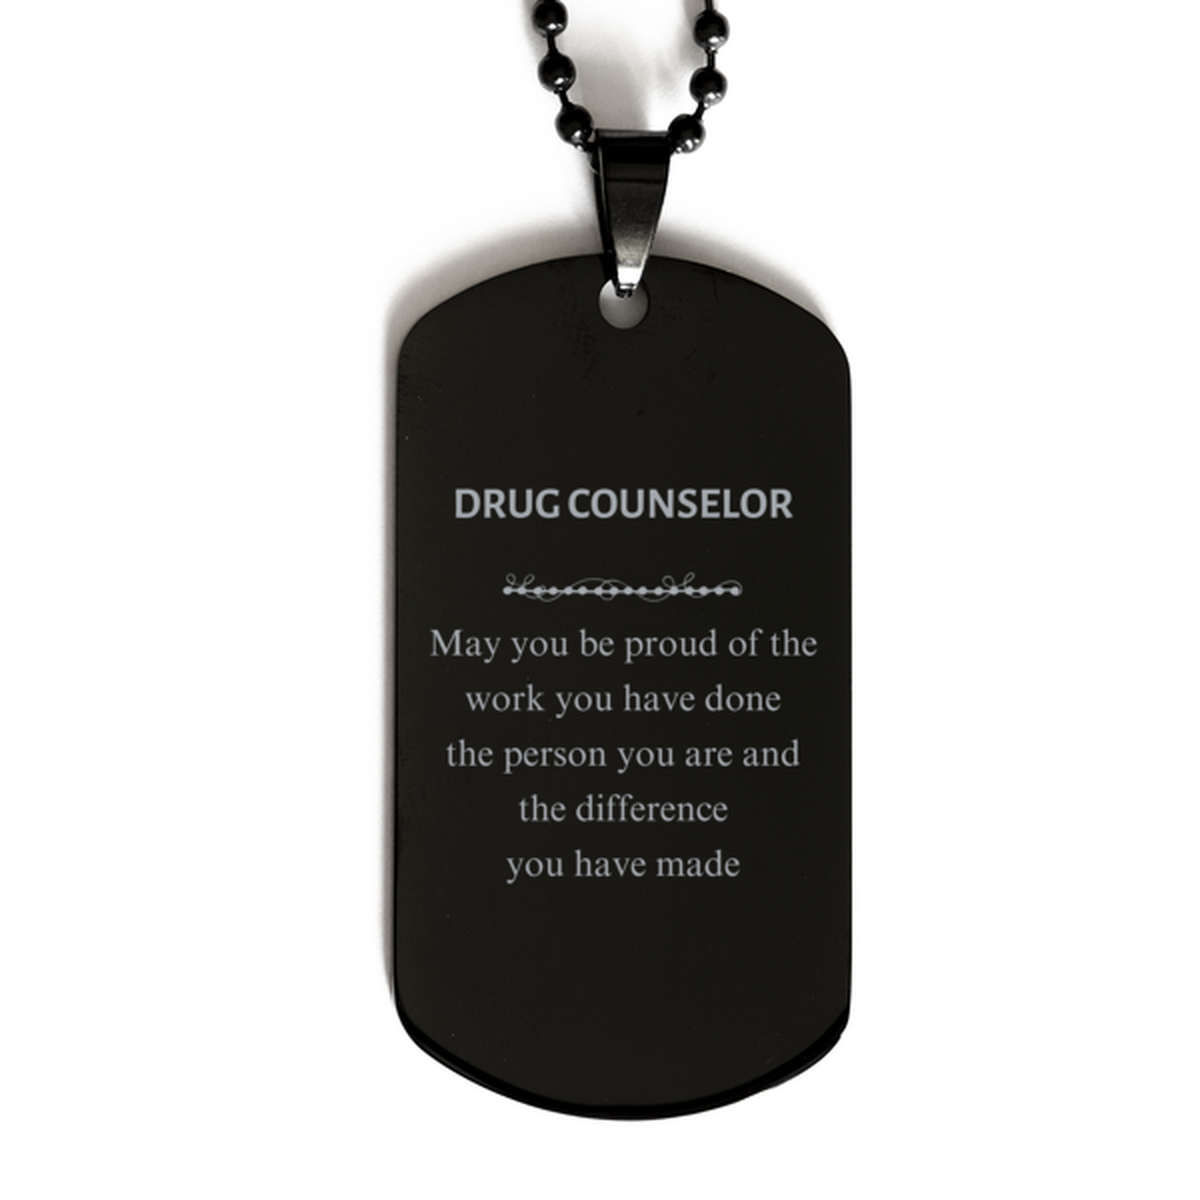 Drug Counselor May you be proud of the work you have done, Retirement Drug Counselor Black Dog Tag for Colleague Appreciation Gifts Amazing for Drug Counselor